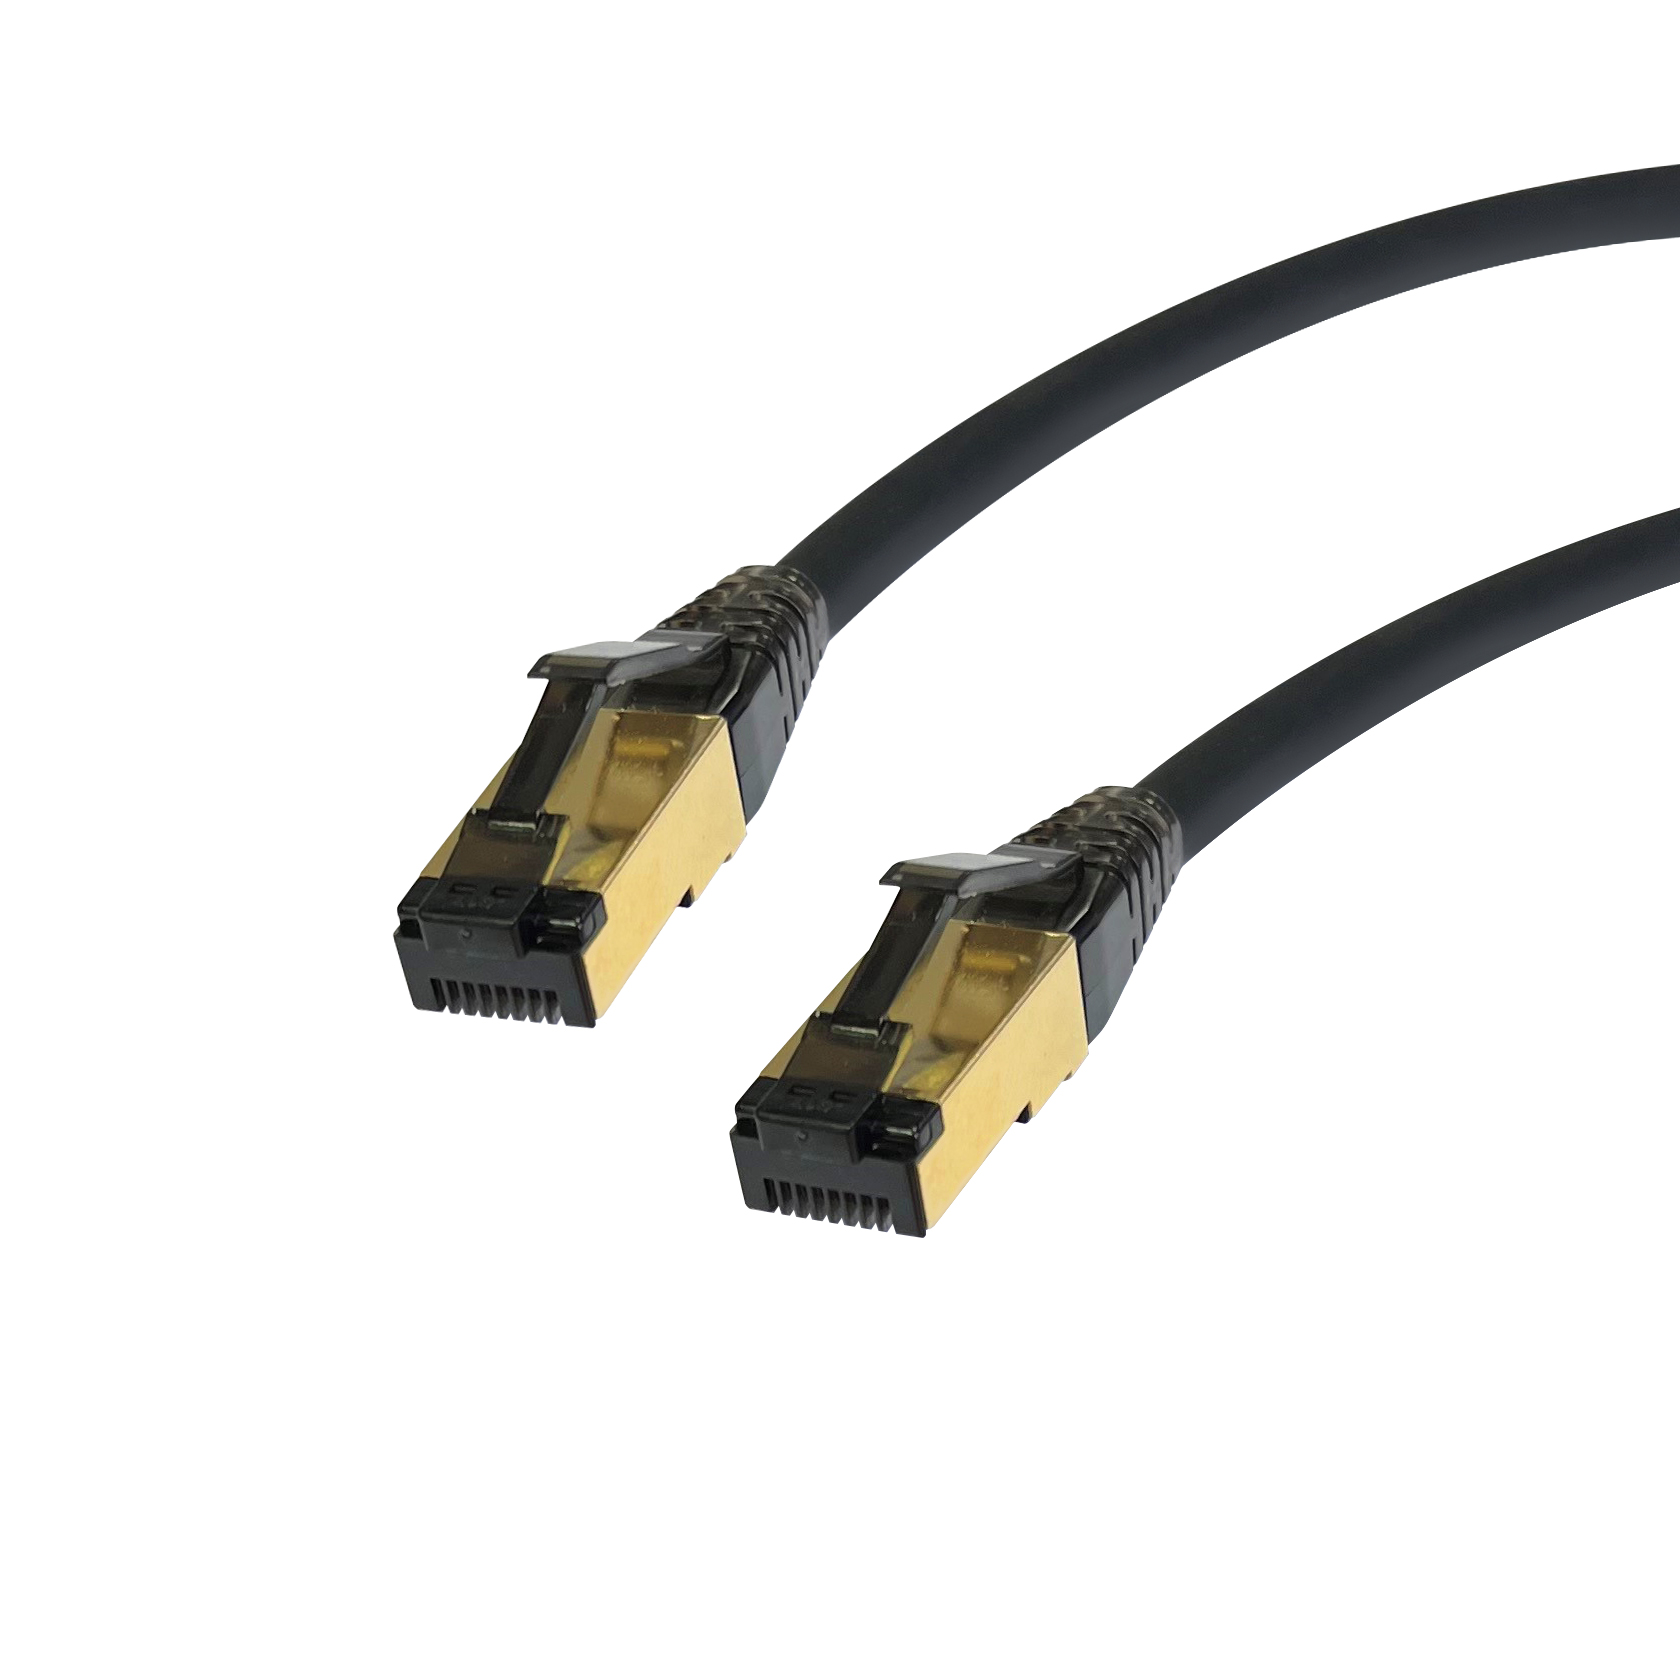 Booted Cat8 LSZH 40g S/FTP RJ45 Cables